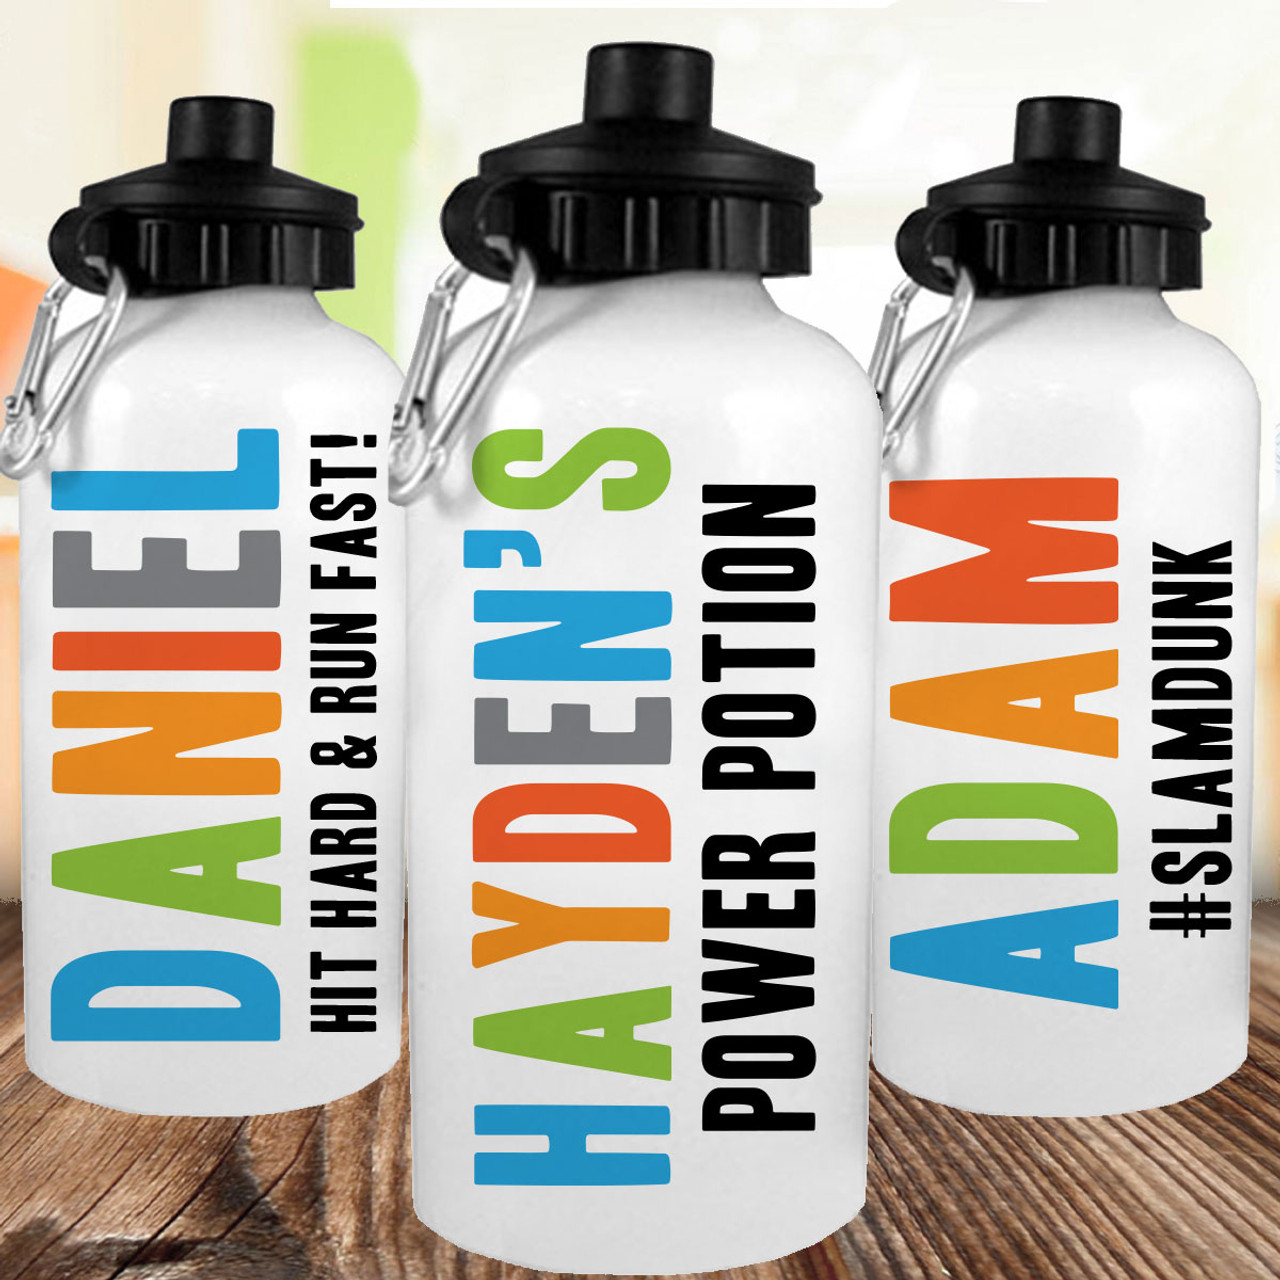 https://cdn11.bigcommerce.com/s-5grzuu6/images/stencil/1280x1280/products/4692/30255/Chunky-Wild-Water-Bottle-Trio__04986.1591999656.jpg?c=2